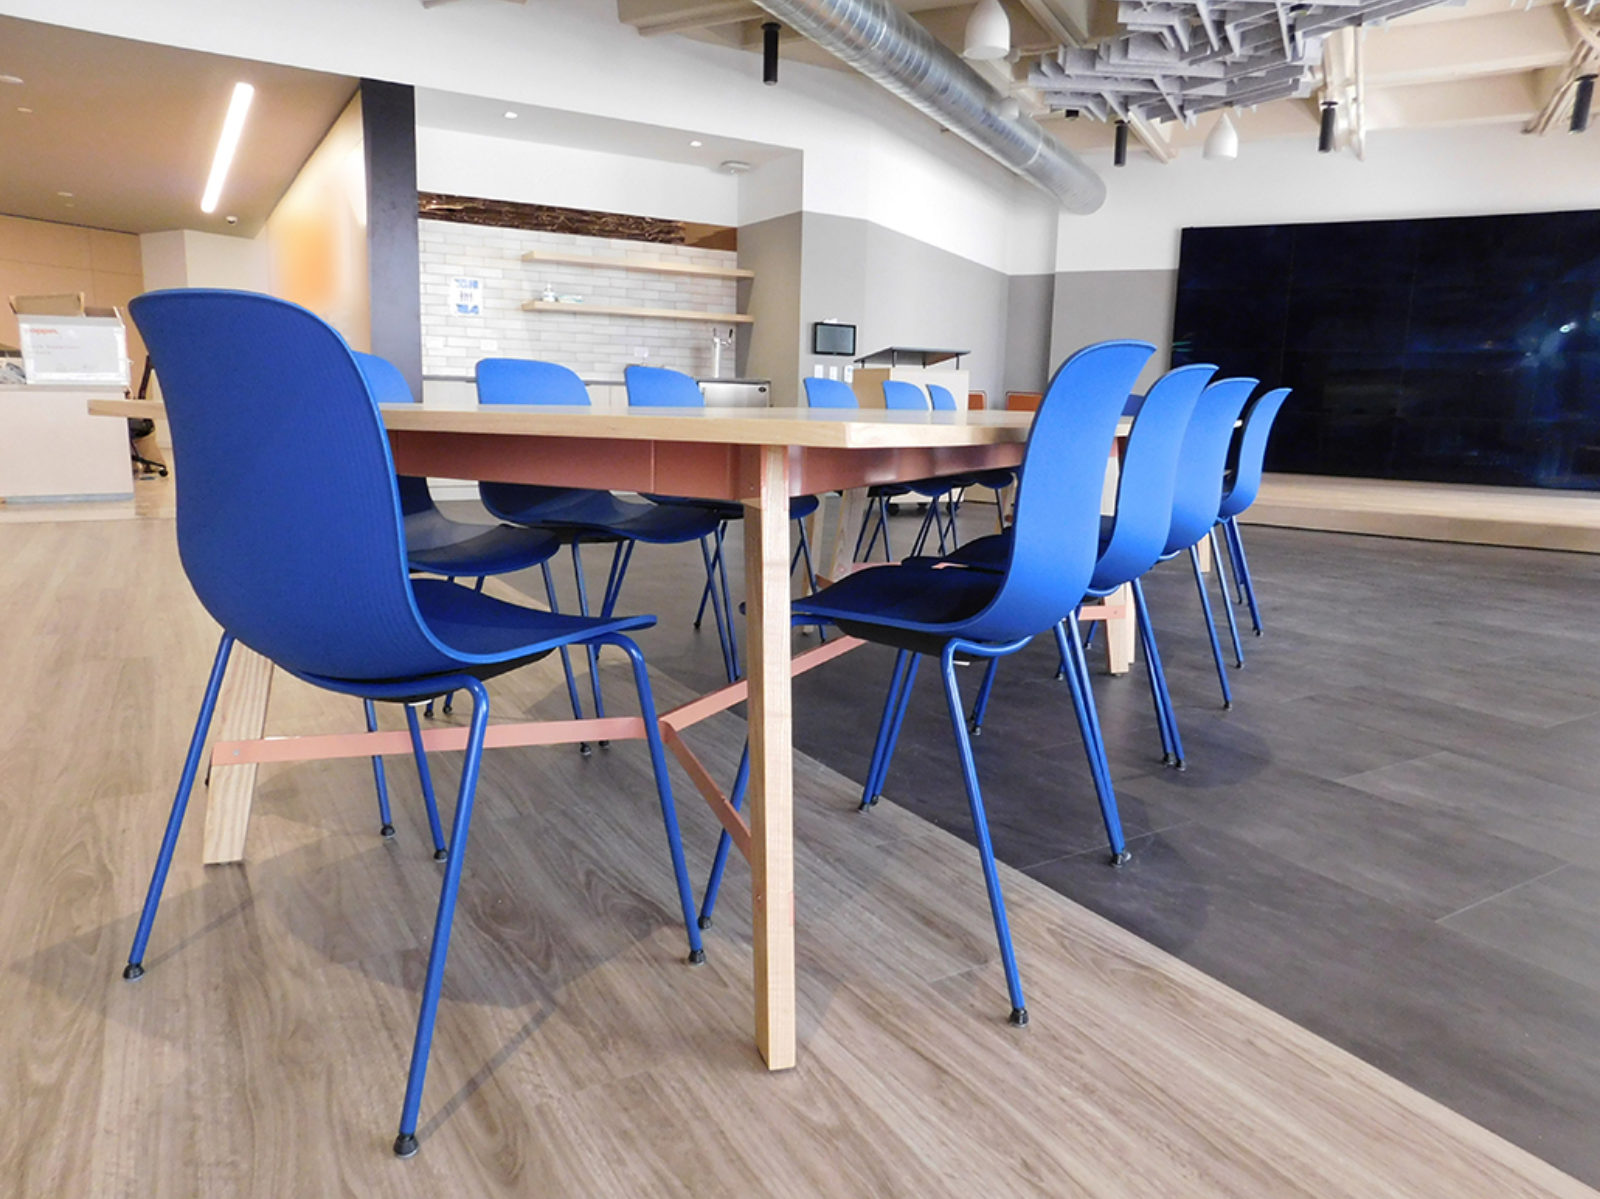 Blue poly chairs with blue metal legs, light wooden table